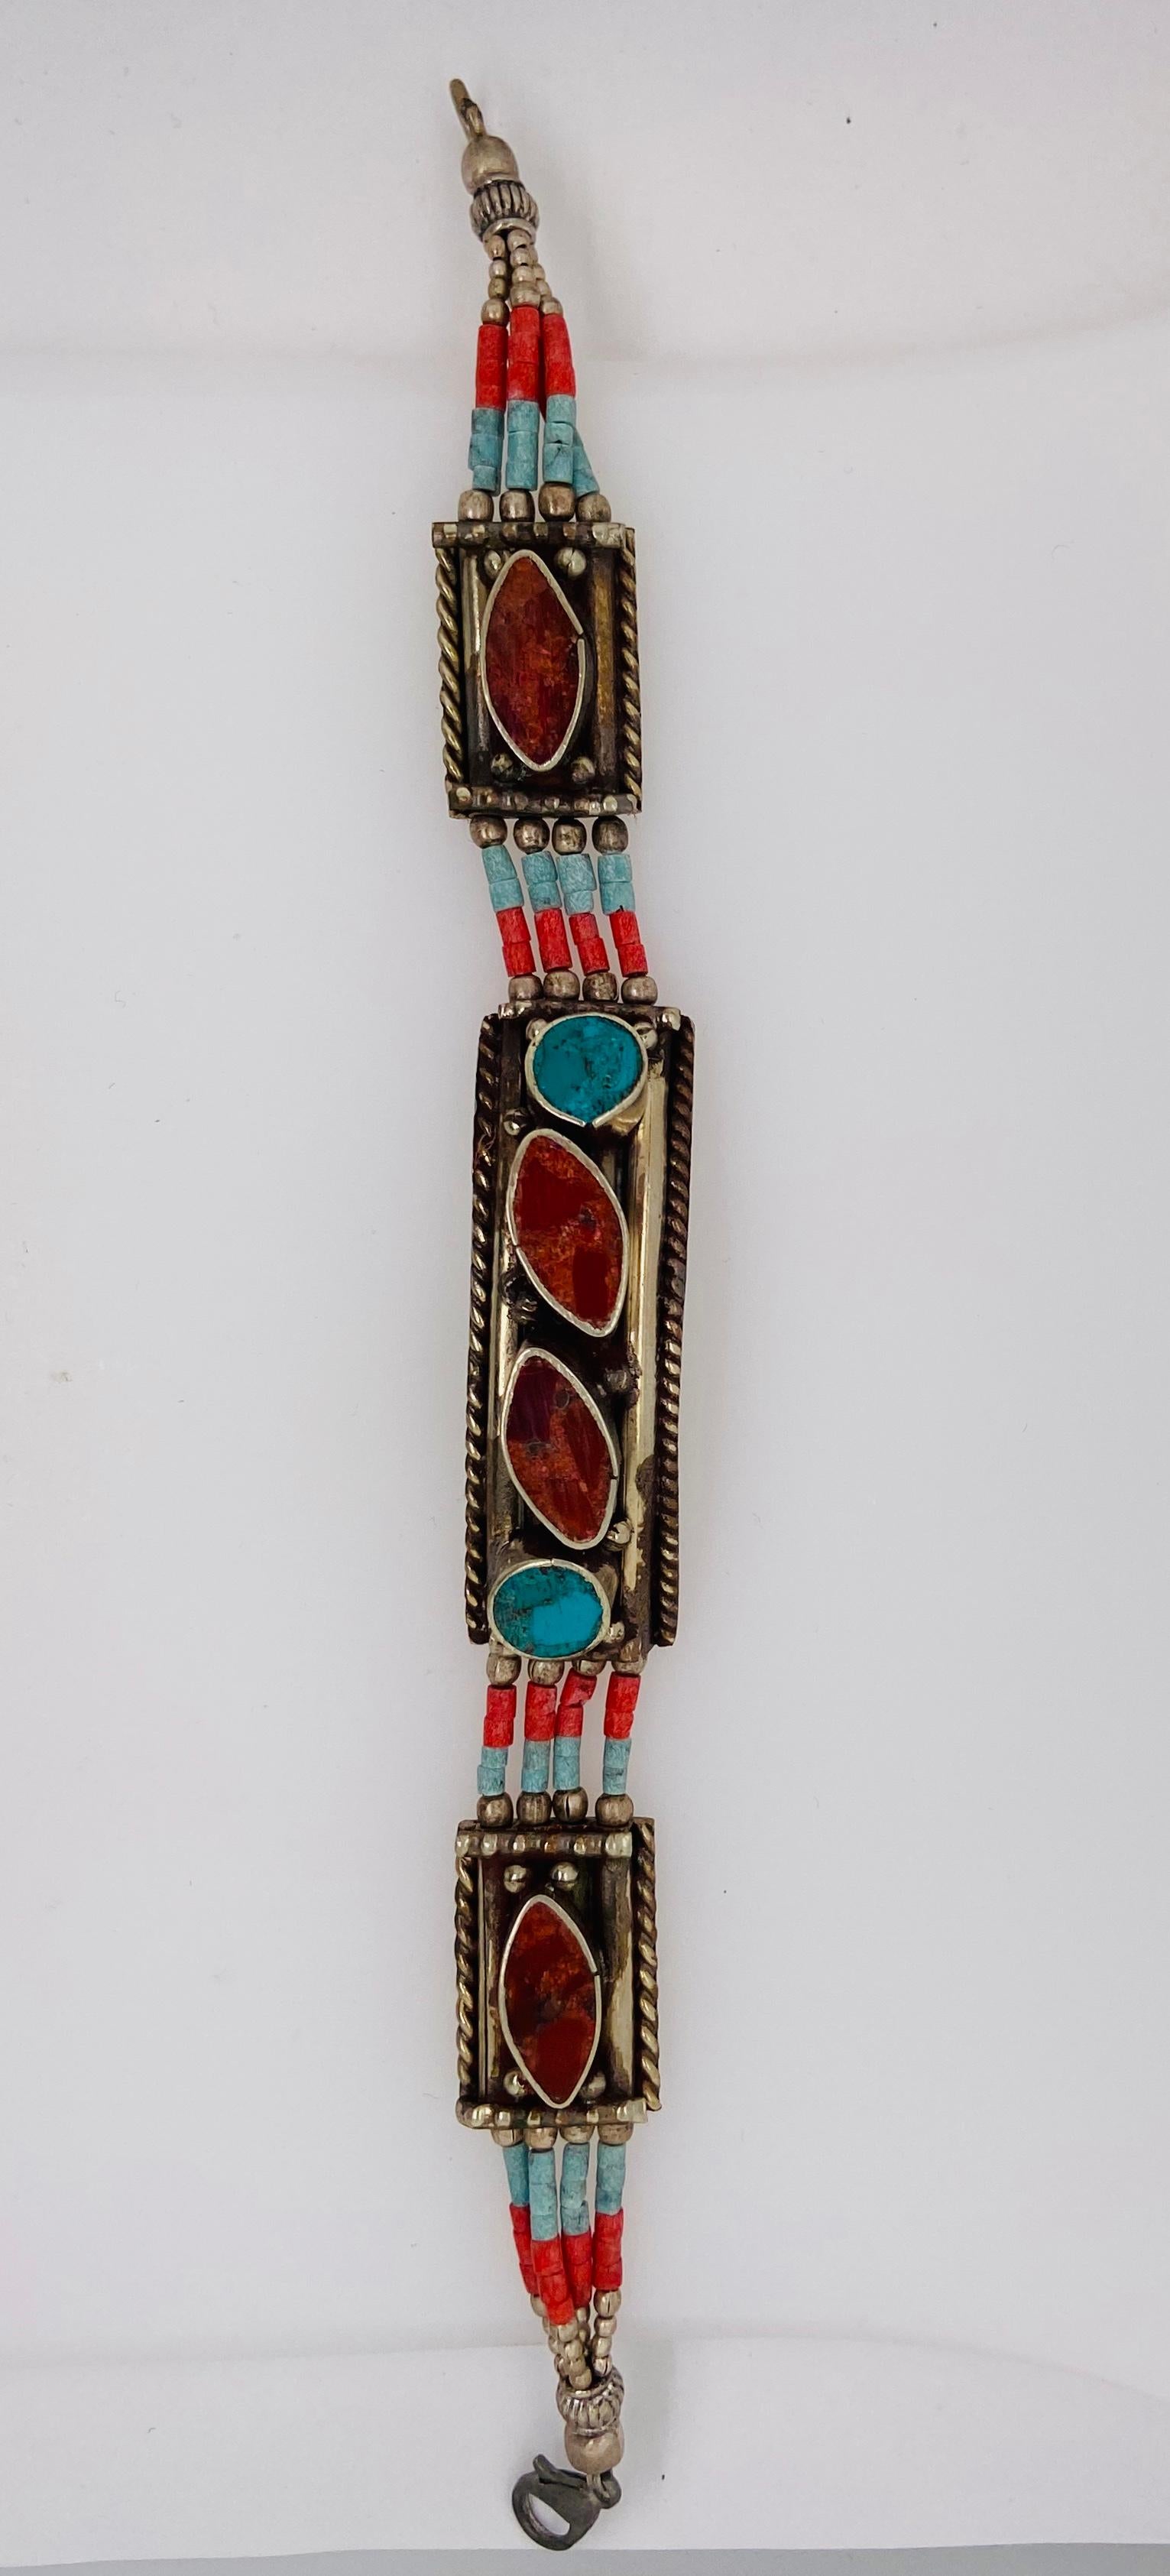 A lovely handmade Moroccan Berber tribal pure silver bracelet. This beautiful and one of a kind piece of jewelry made around 1920's in the Atlas Mountains in Morocco features genuine turquoise and red stones finely tear-shaped The impressive